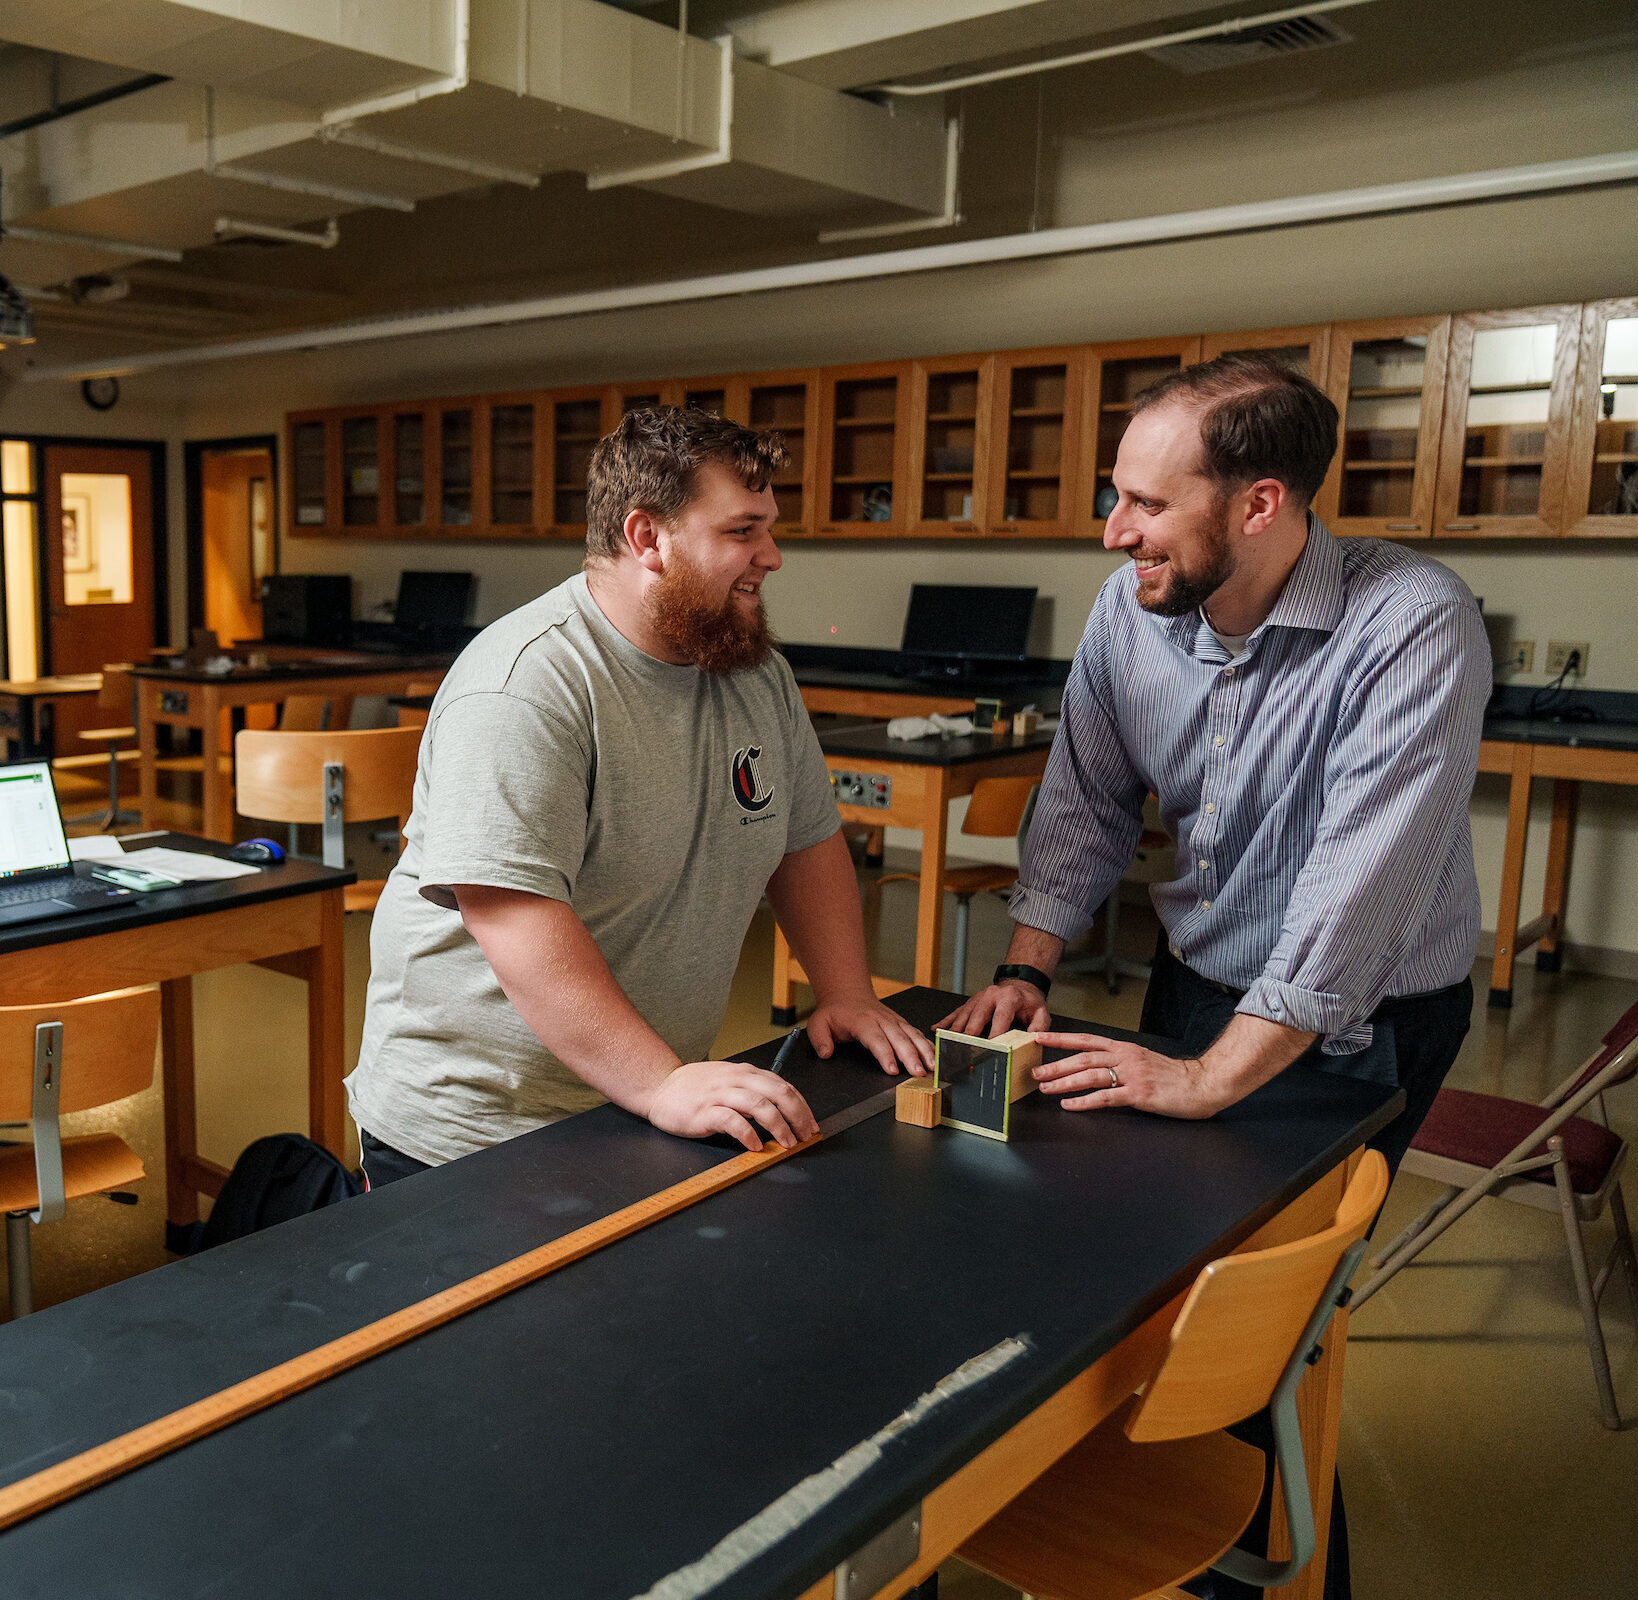 Dr. Dan Pitonyak works with student during Physics lab